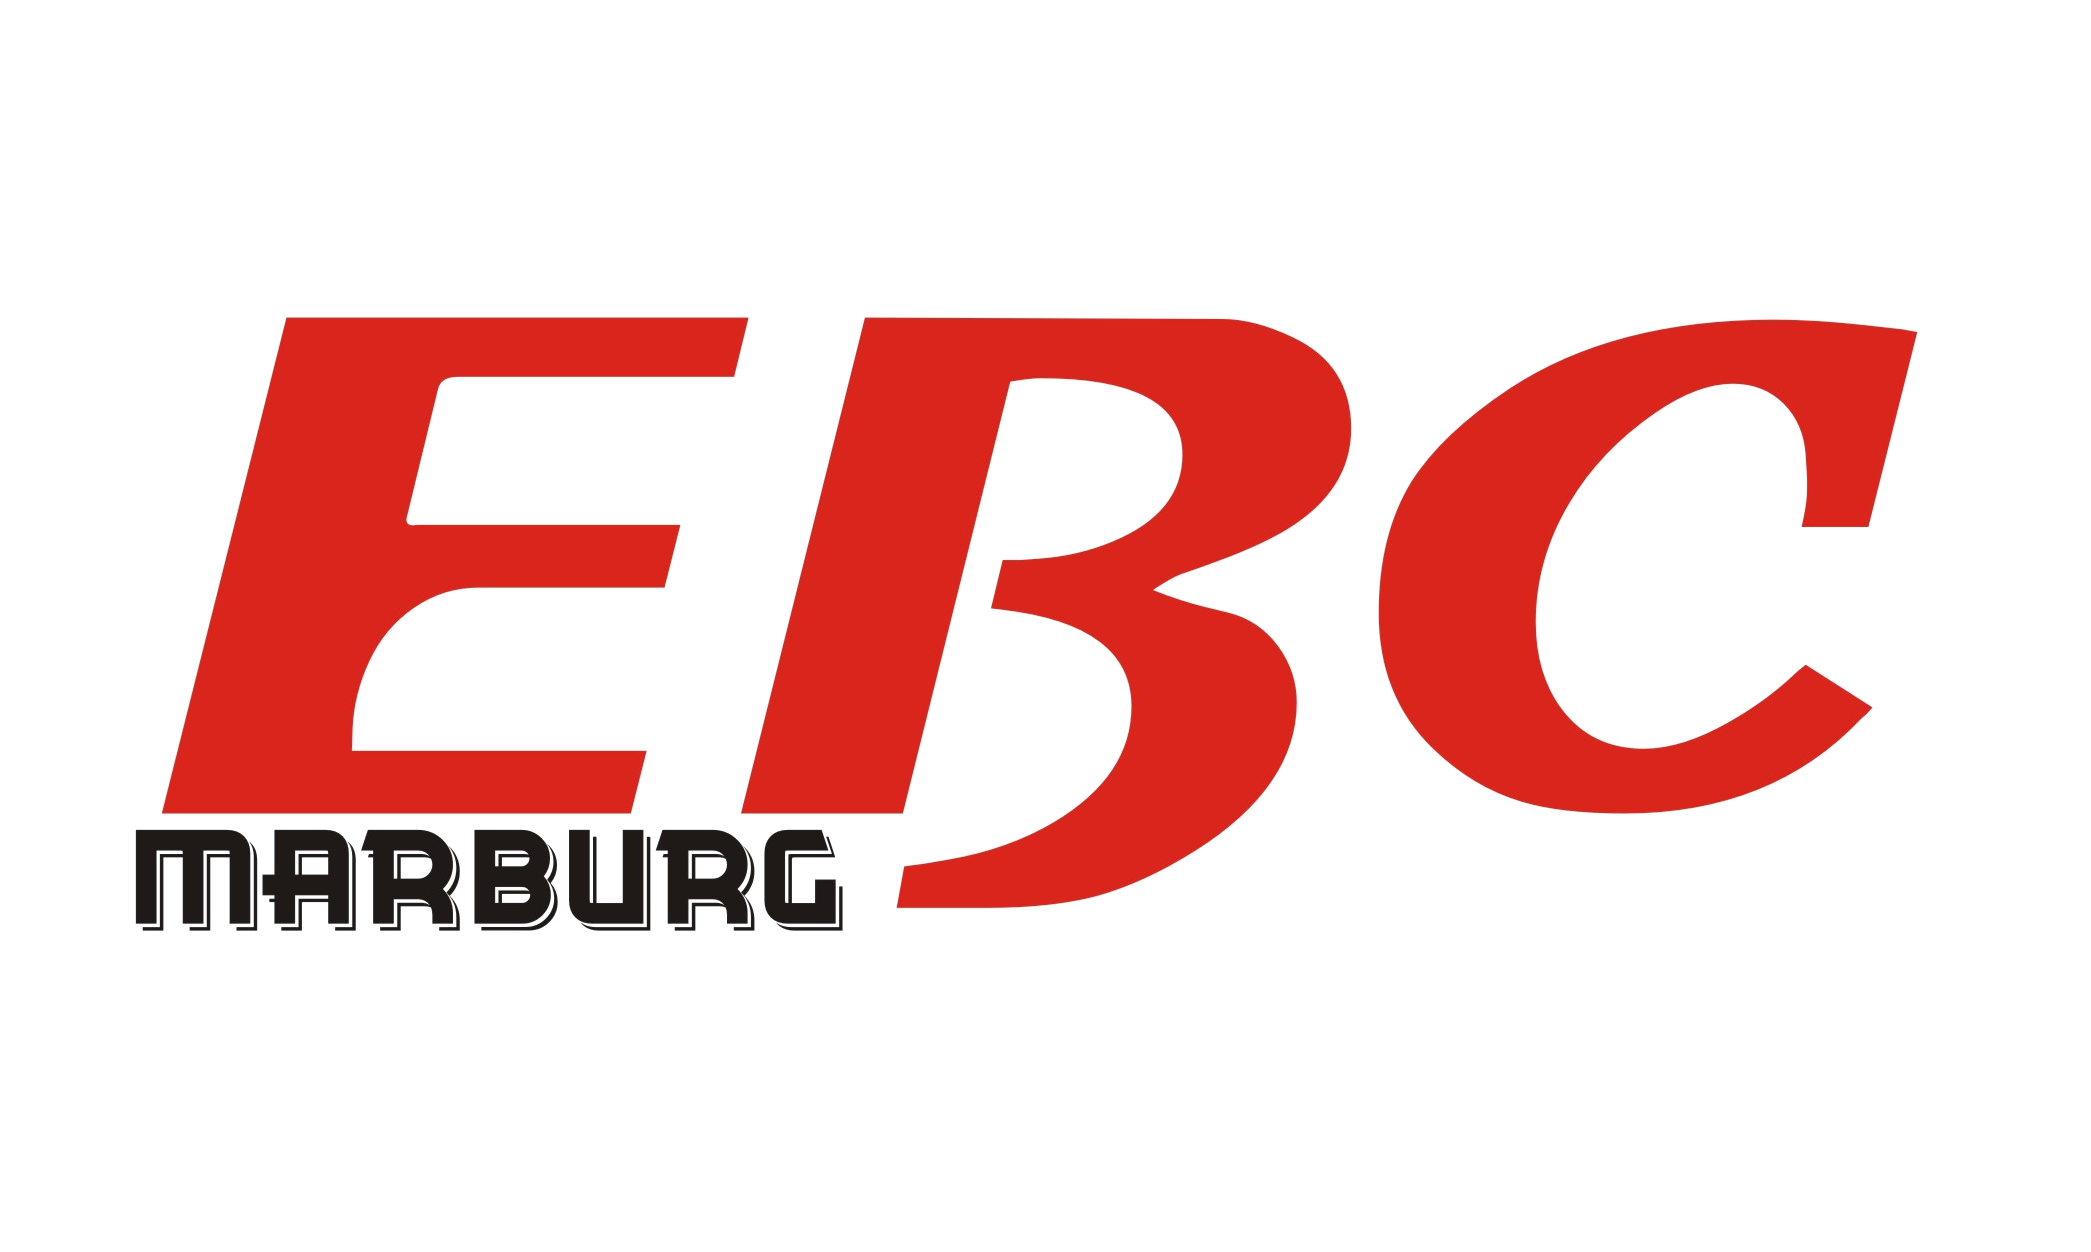 You are currently viewing EBC Marburg GmbH